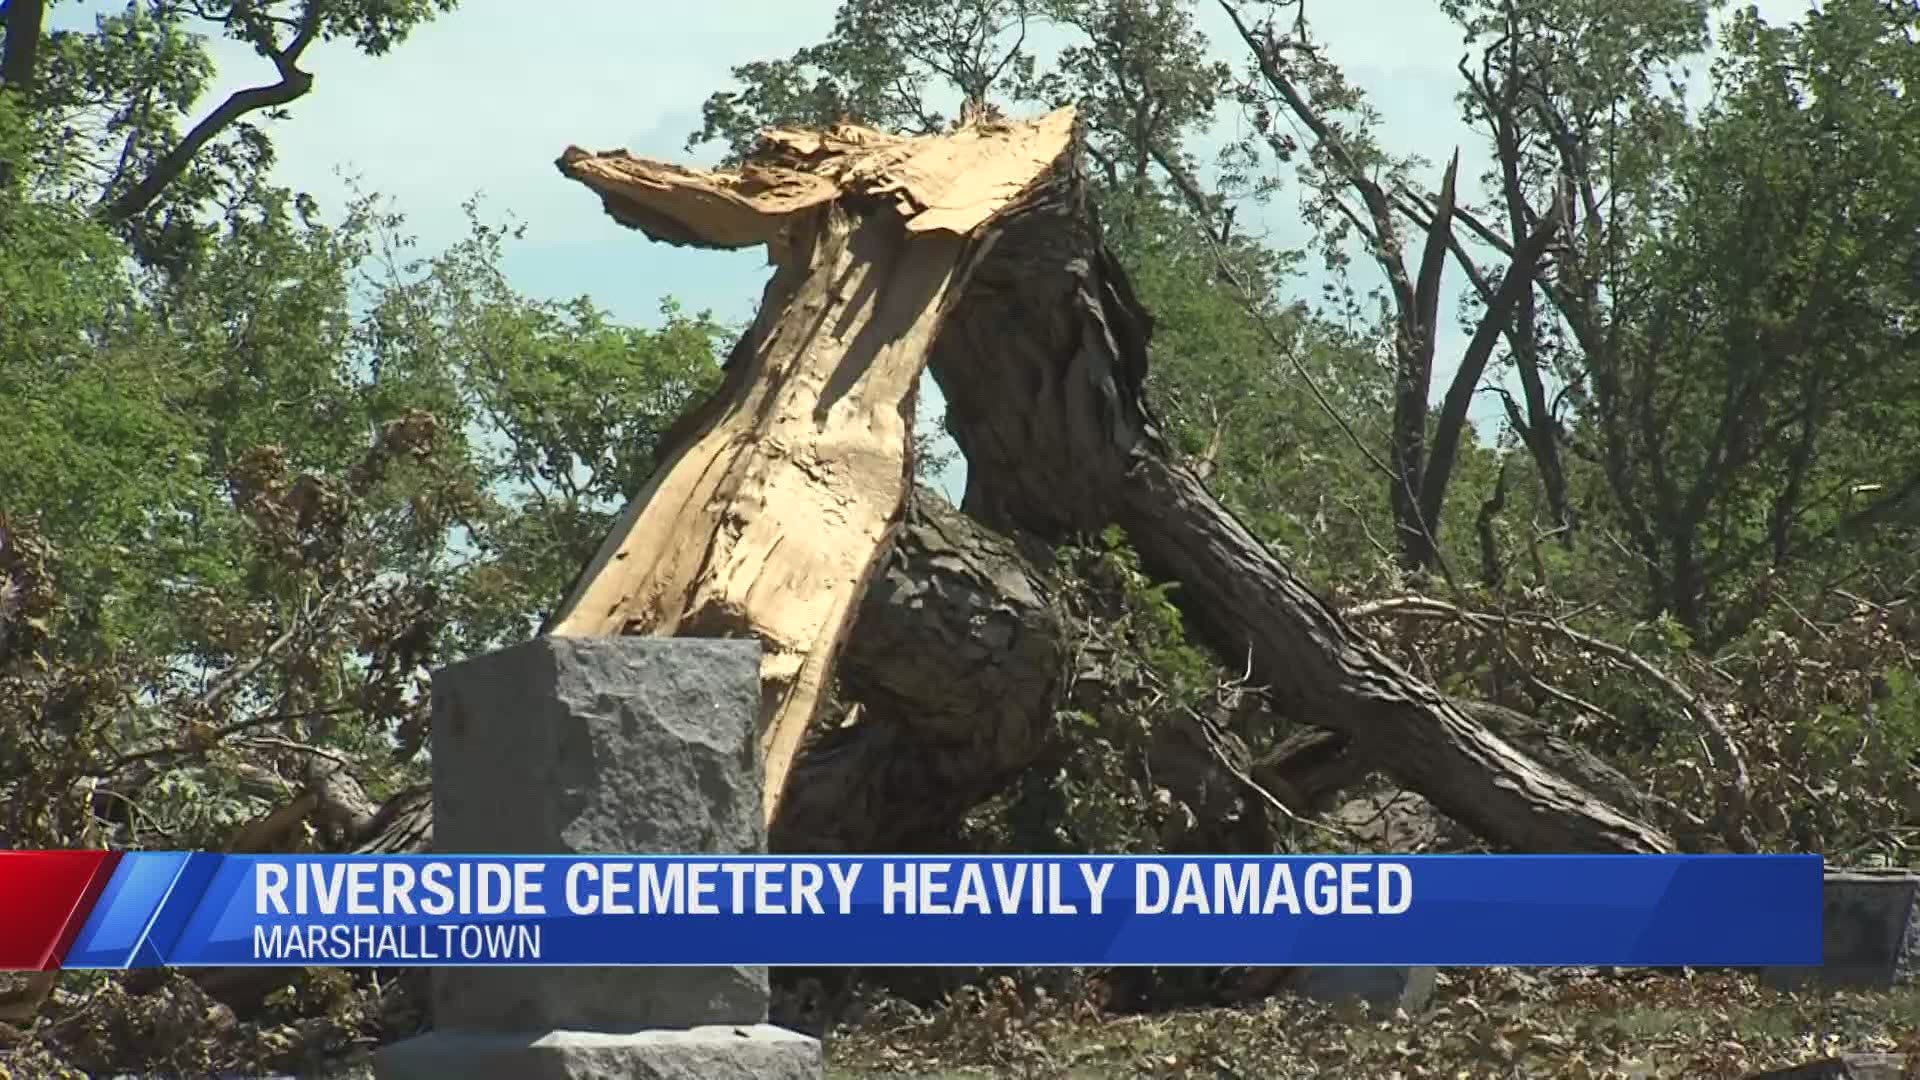 Trees are snapped, monuments are toppled and vaults are exposed in the historic Riverside Cemetery.